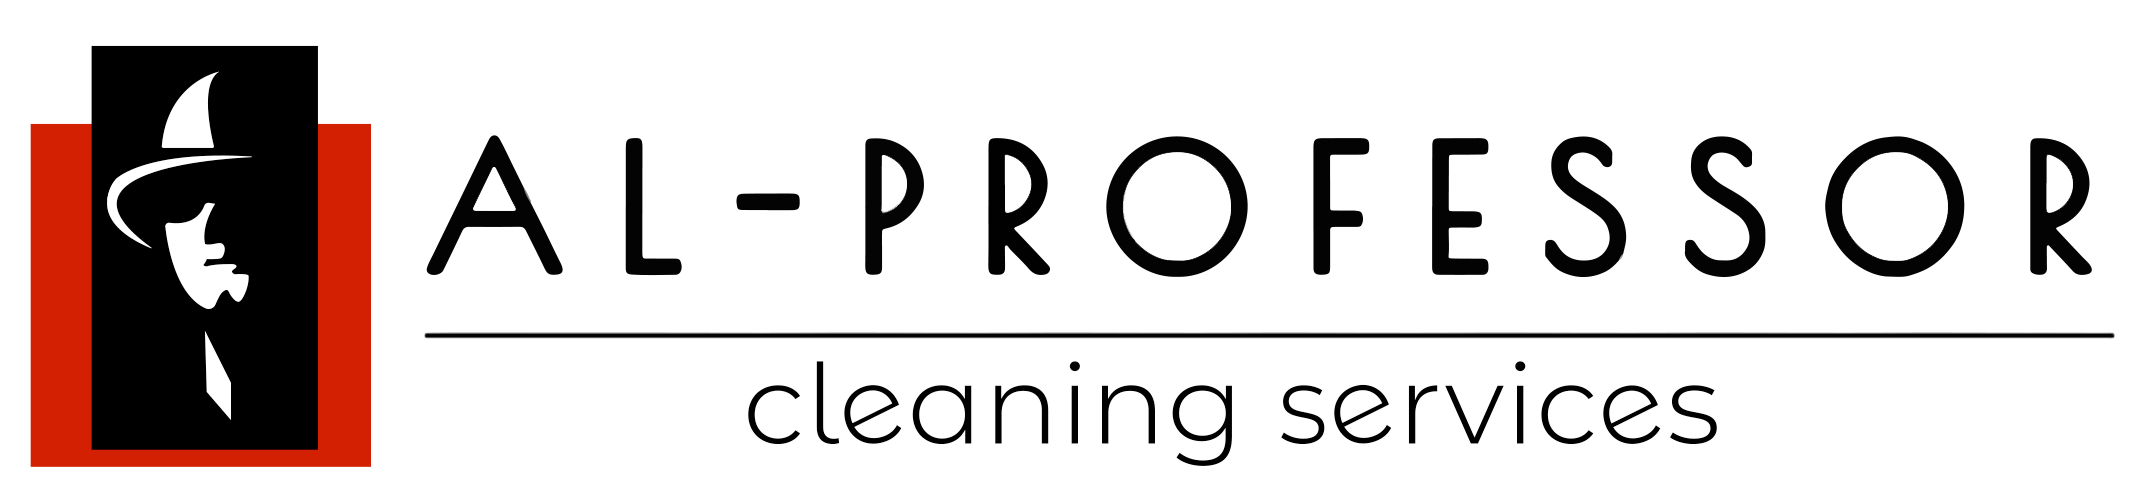 Al Professor Cleaning Services